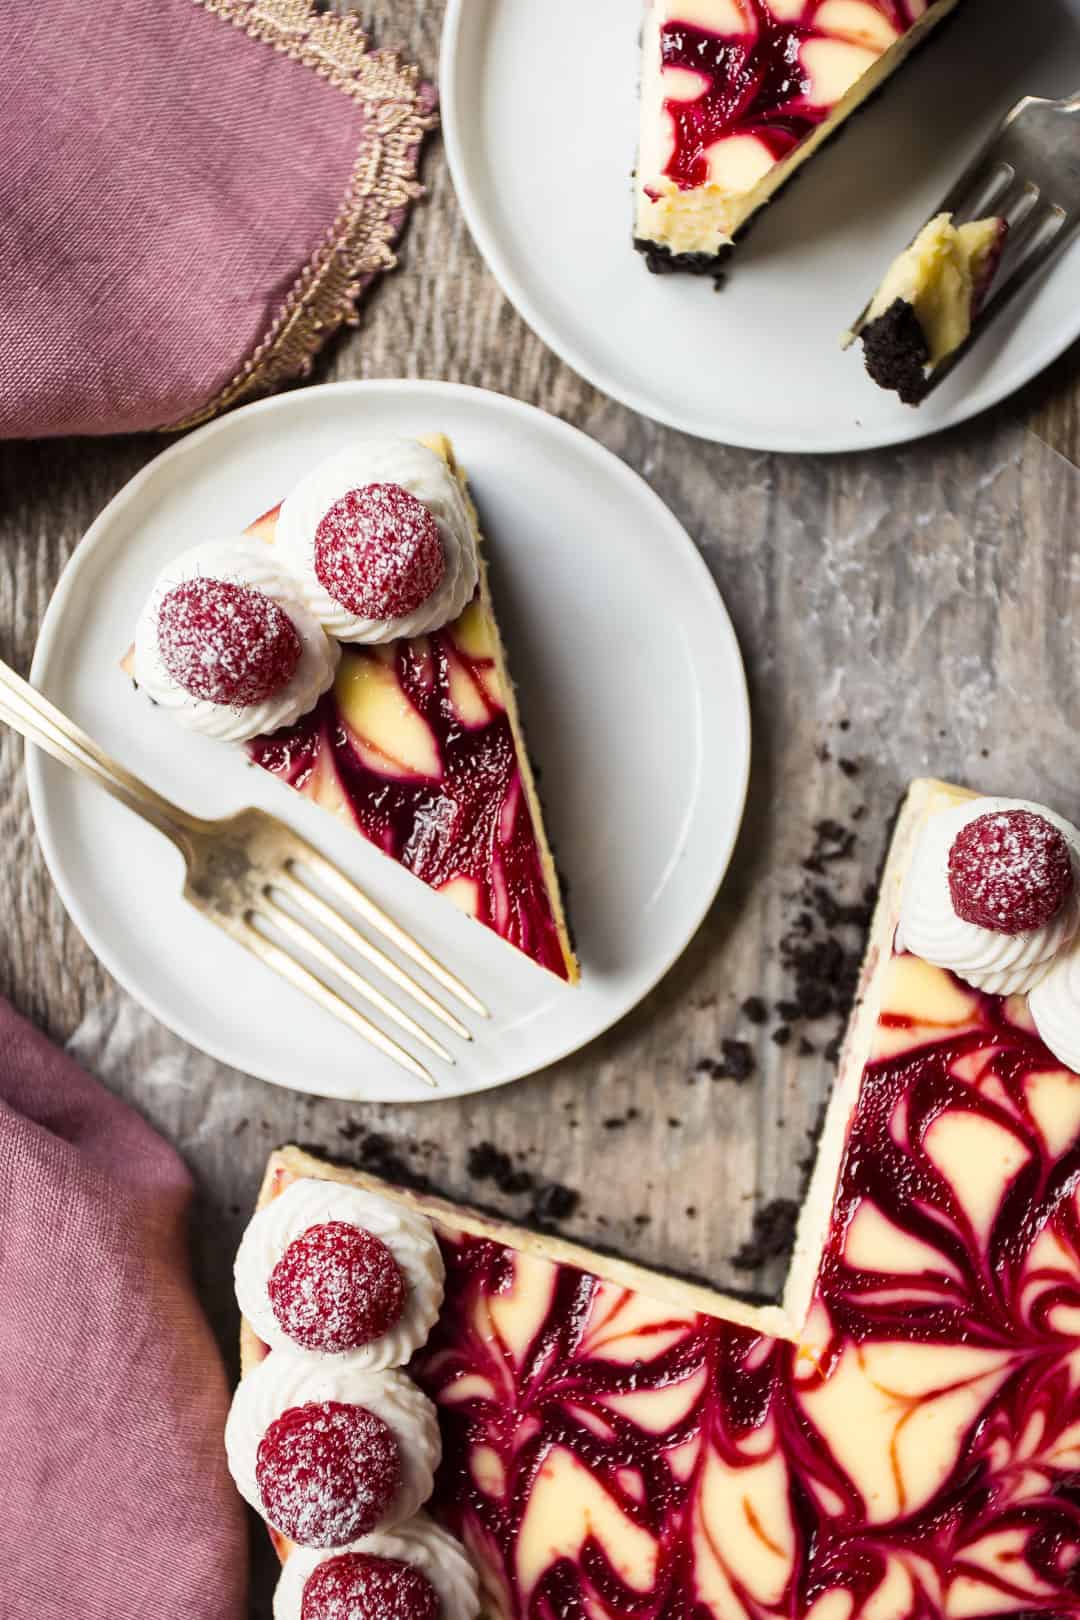 Overhead image of white chocolate raspberry cheesecake with slices on white plates with silver forks.